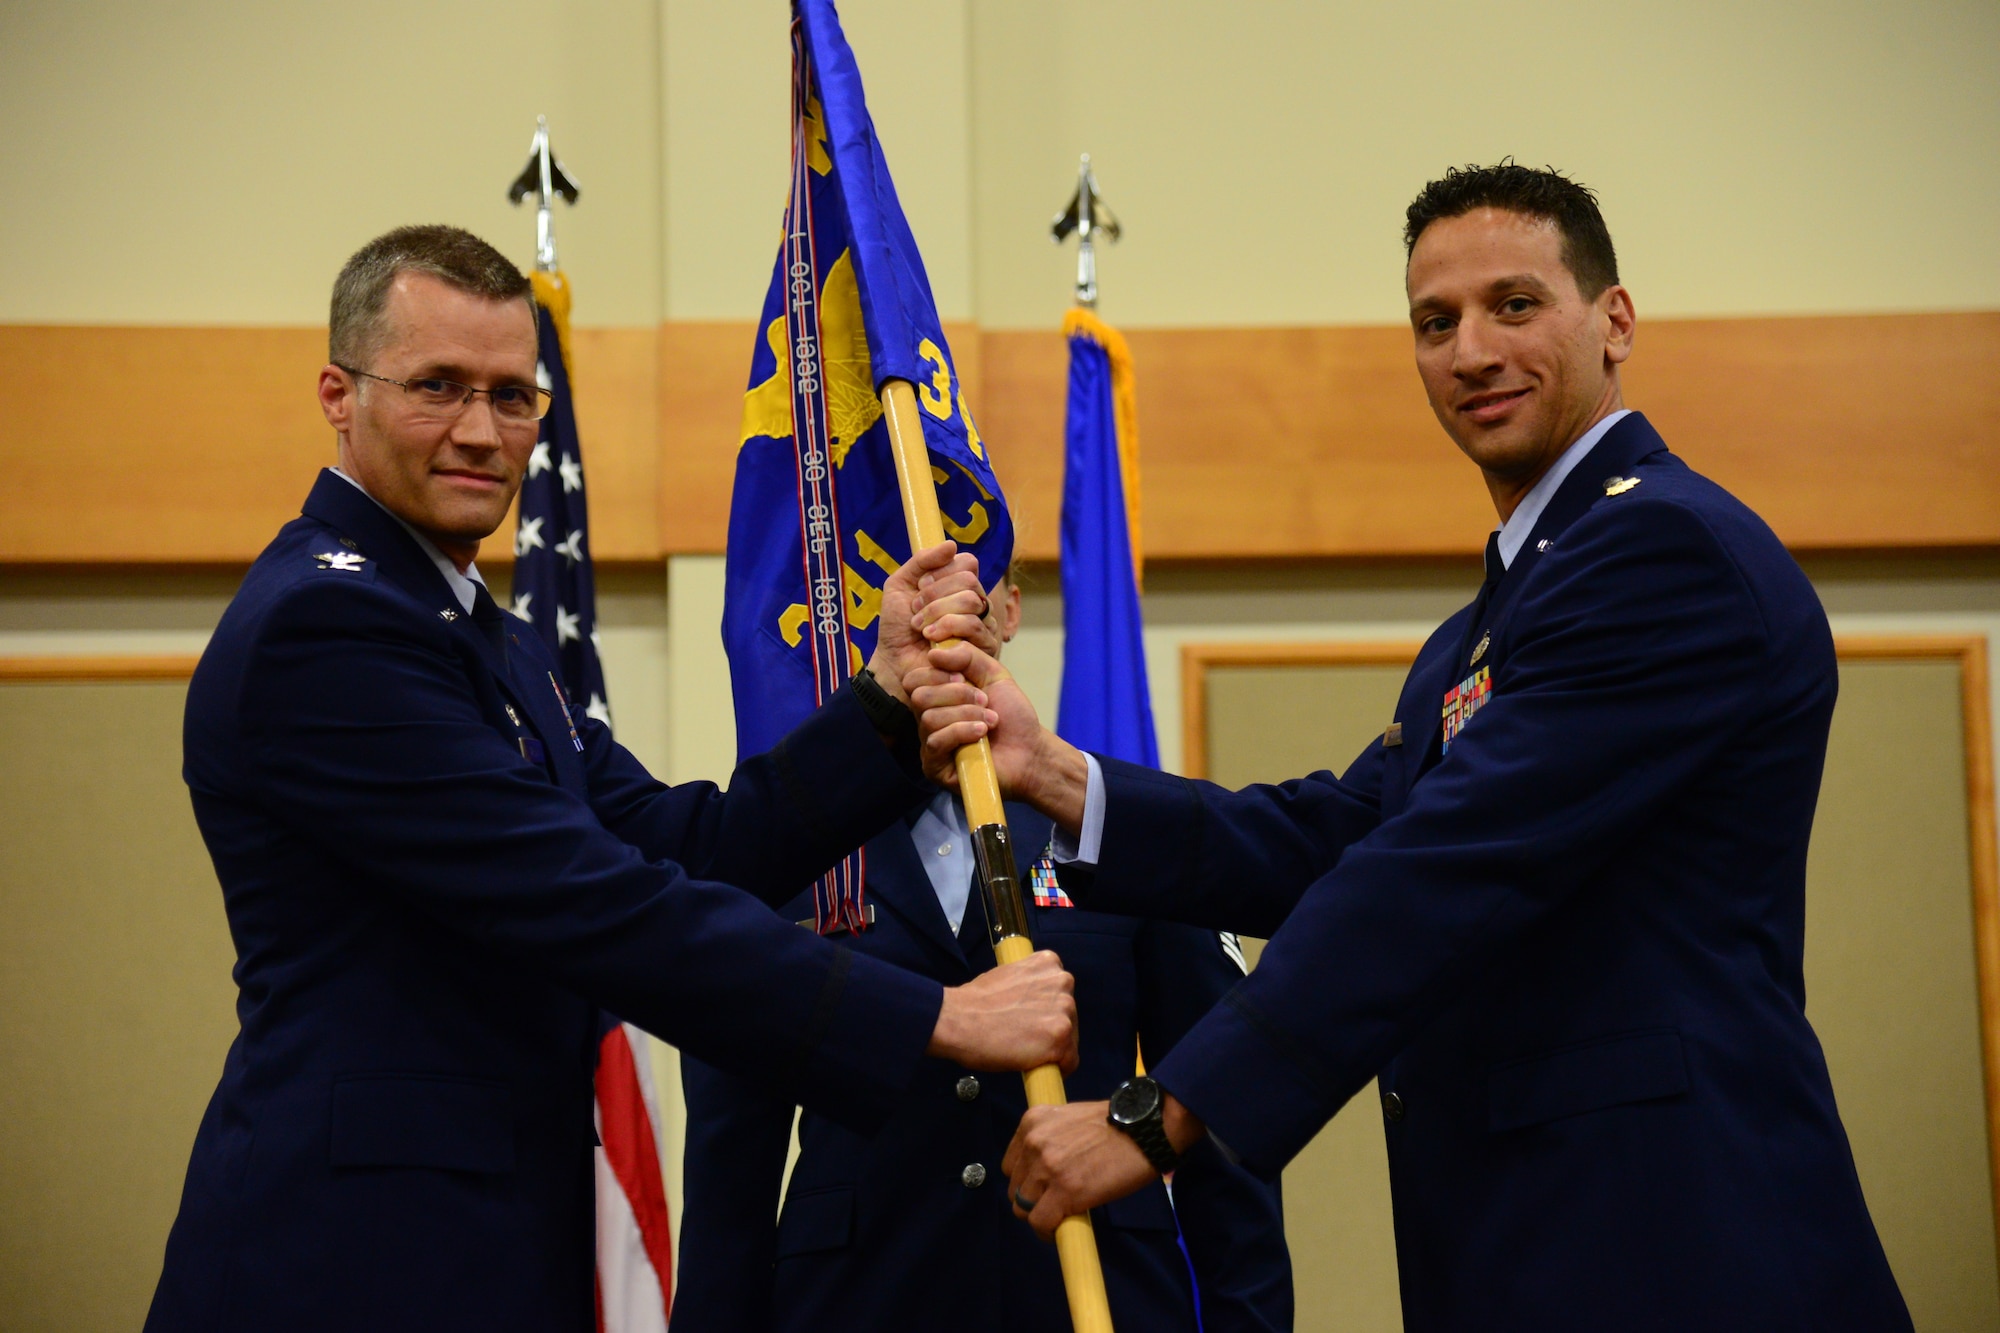 Maj. Frank Schiavone, right, accepts command of the 341st Contracting Squadron from Col. Marcus Glenn, 341st Mission Support Group commander, during an assumption of command ceremony July 26, 2018, at the Grizzly Bend at Malmstrom AFB, Mont.